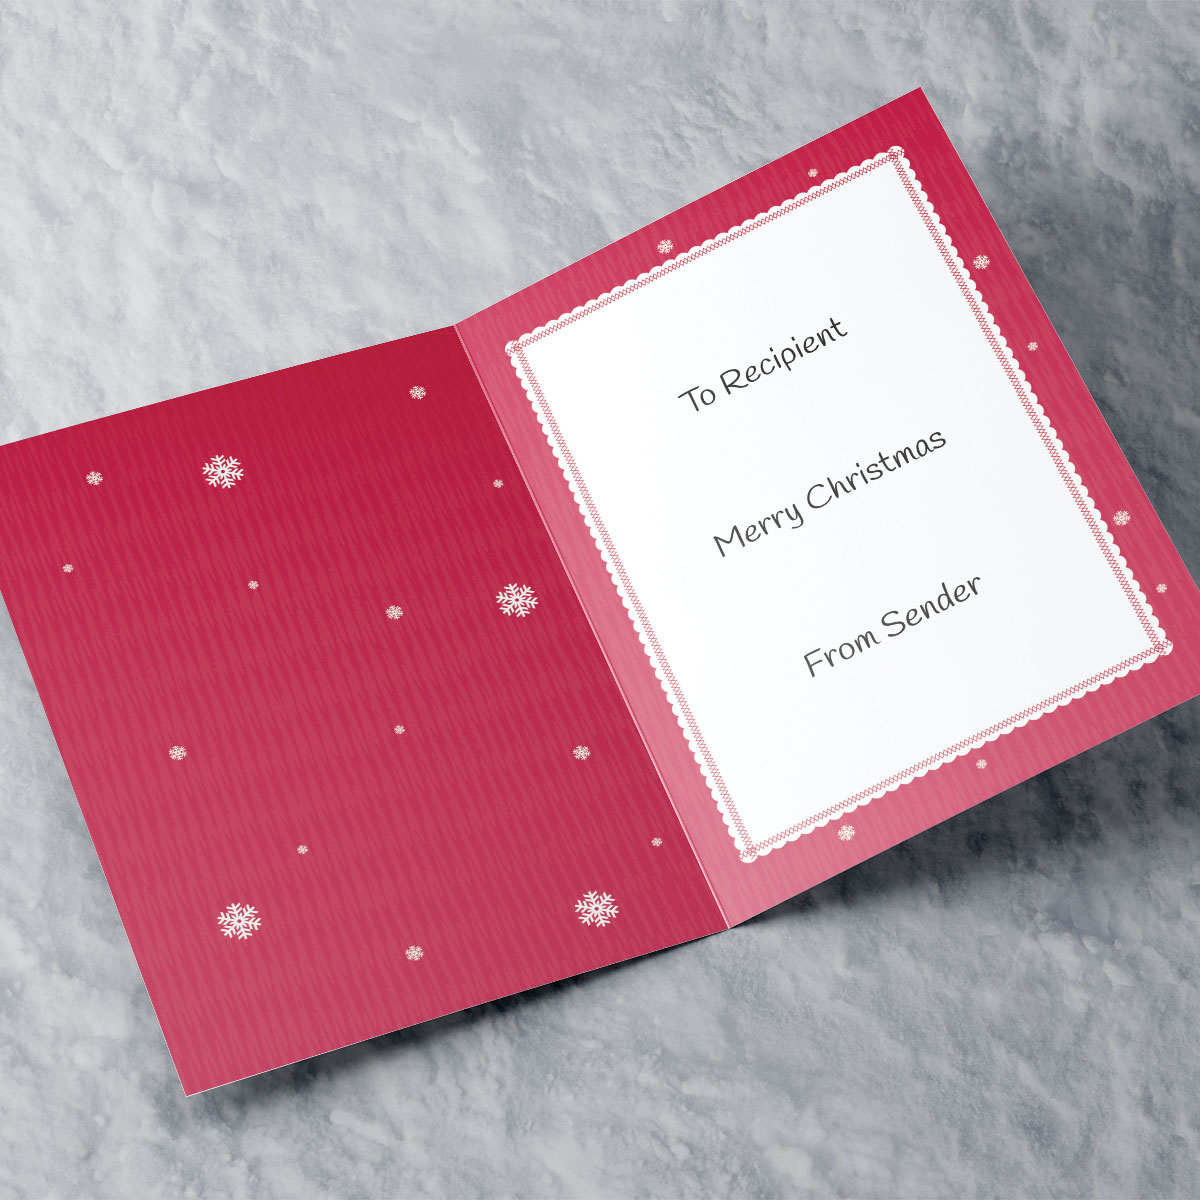 Personalised Christmas Card - You Are Both Loved